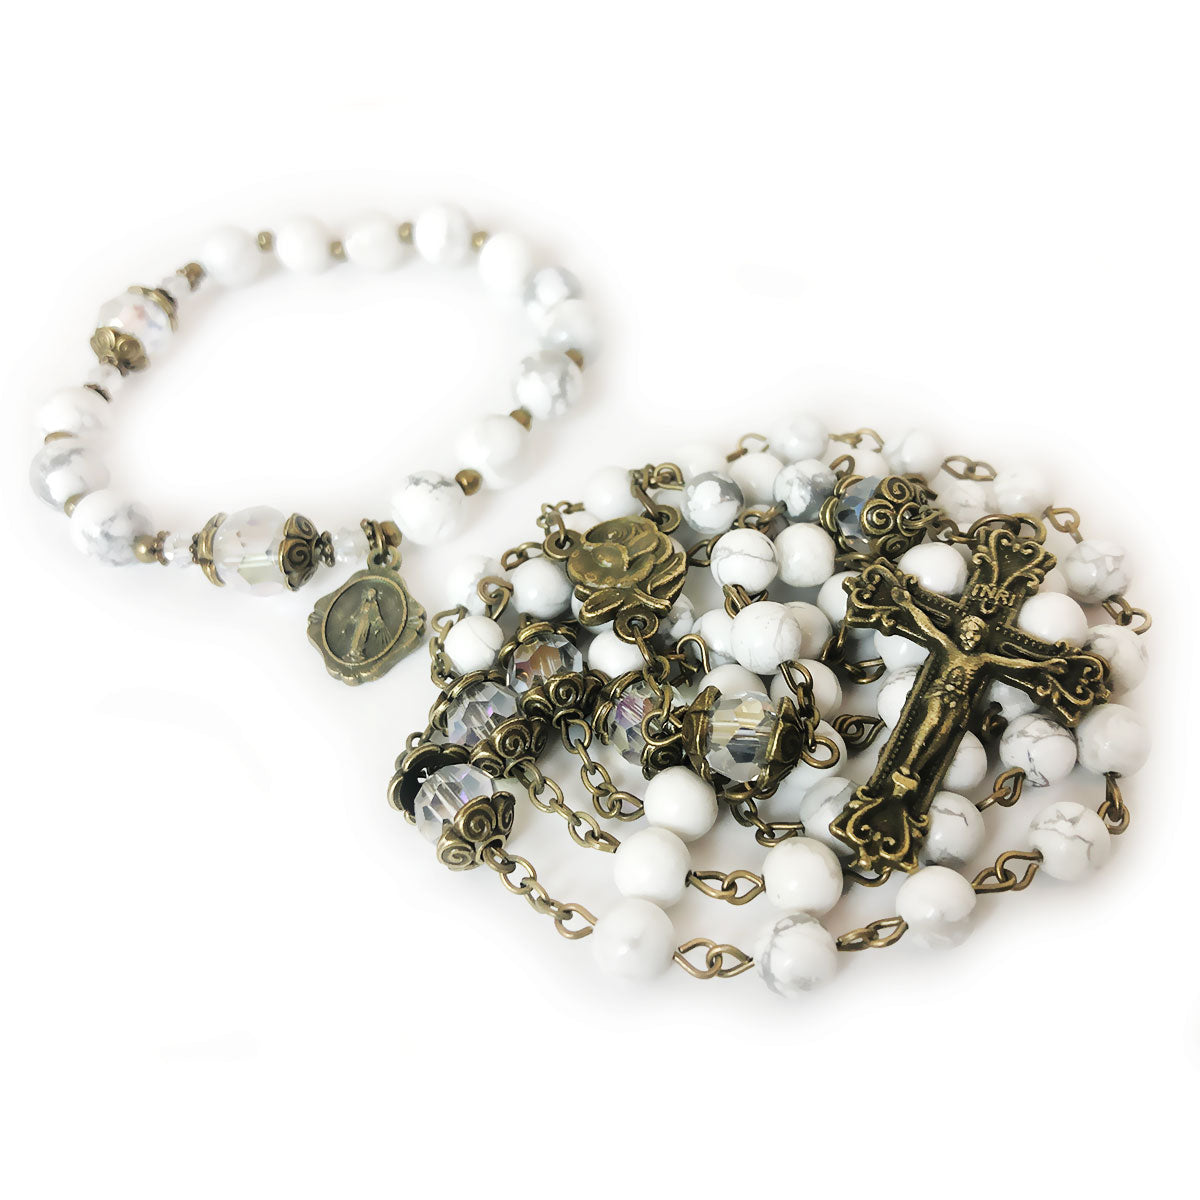 Our Lady of Lourdes White Howlite Stone Rosary Bead and Bracelet Set by Catholic Heirlooms